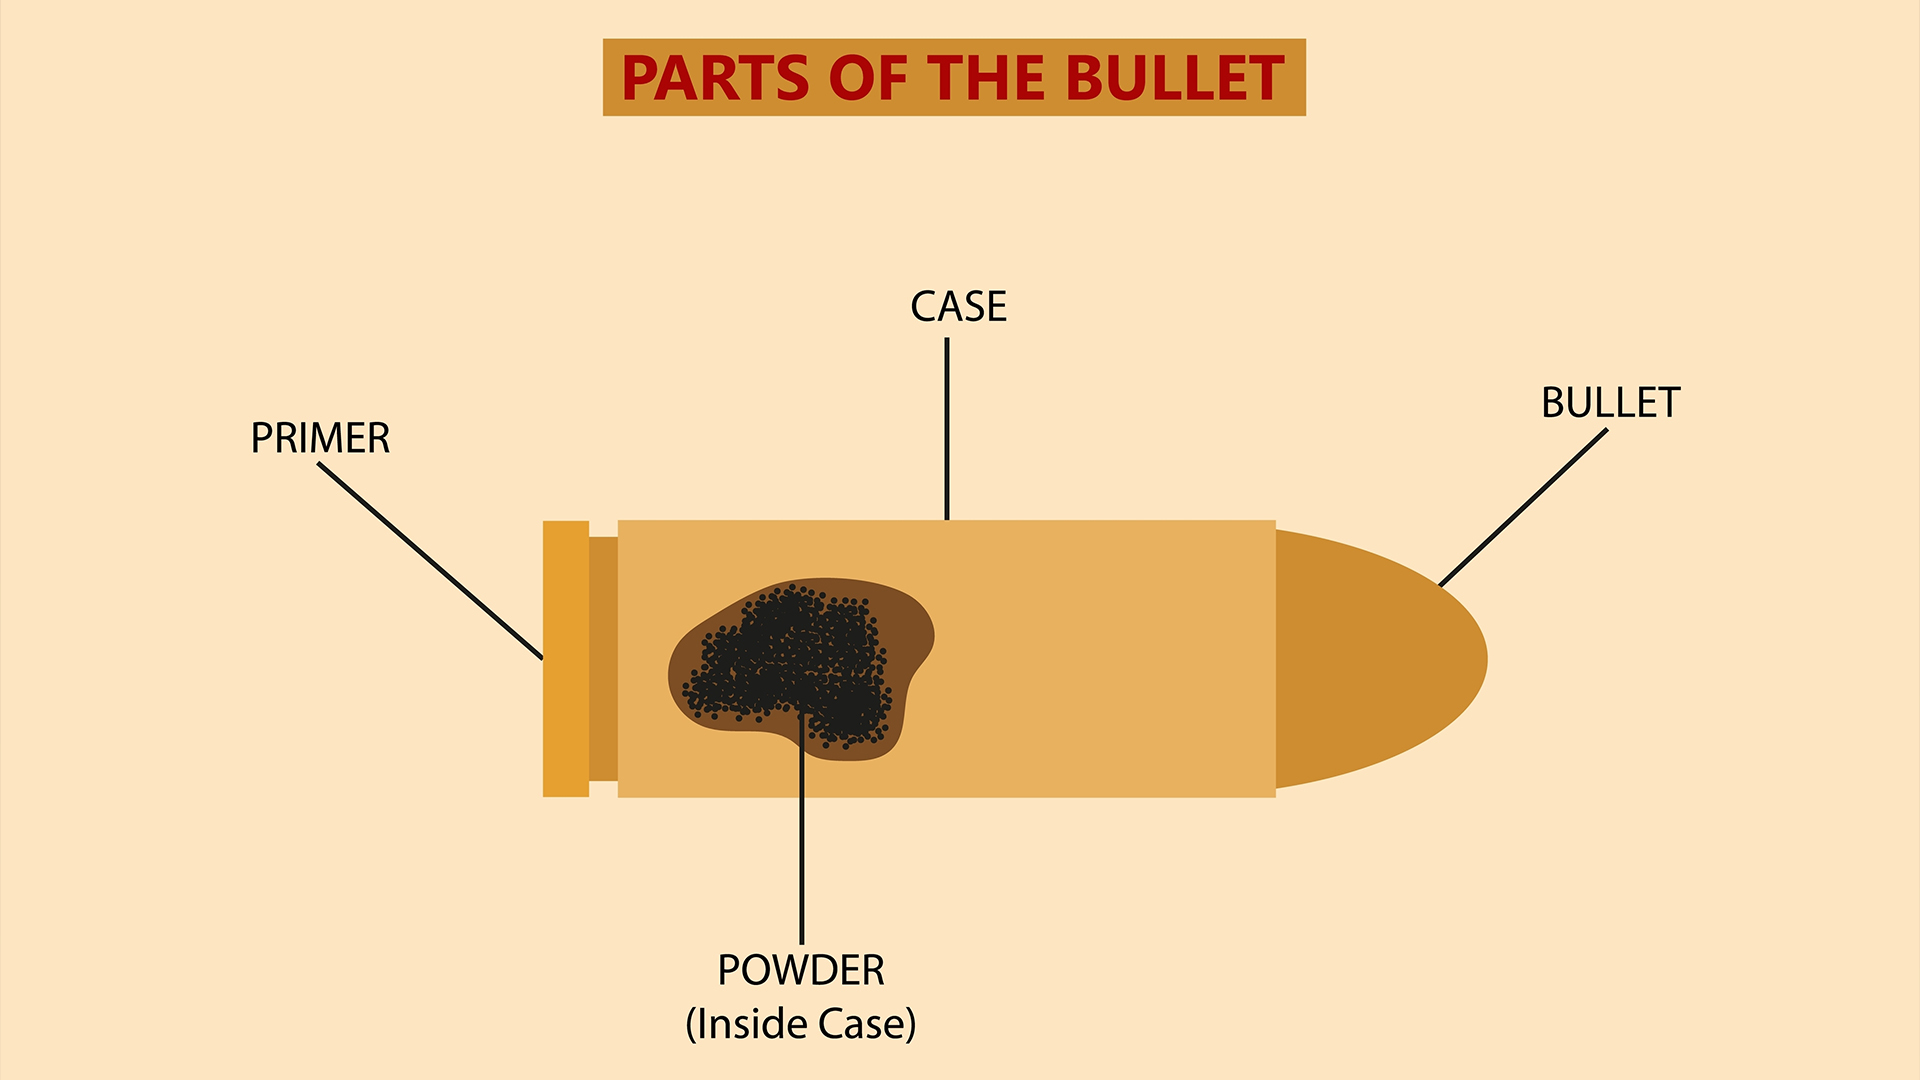 The bullet, which refers to only a small part of the cartridge, is usually made out of heavy metals such as lead.